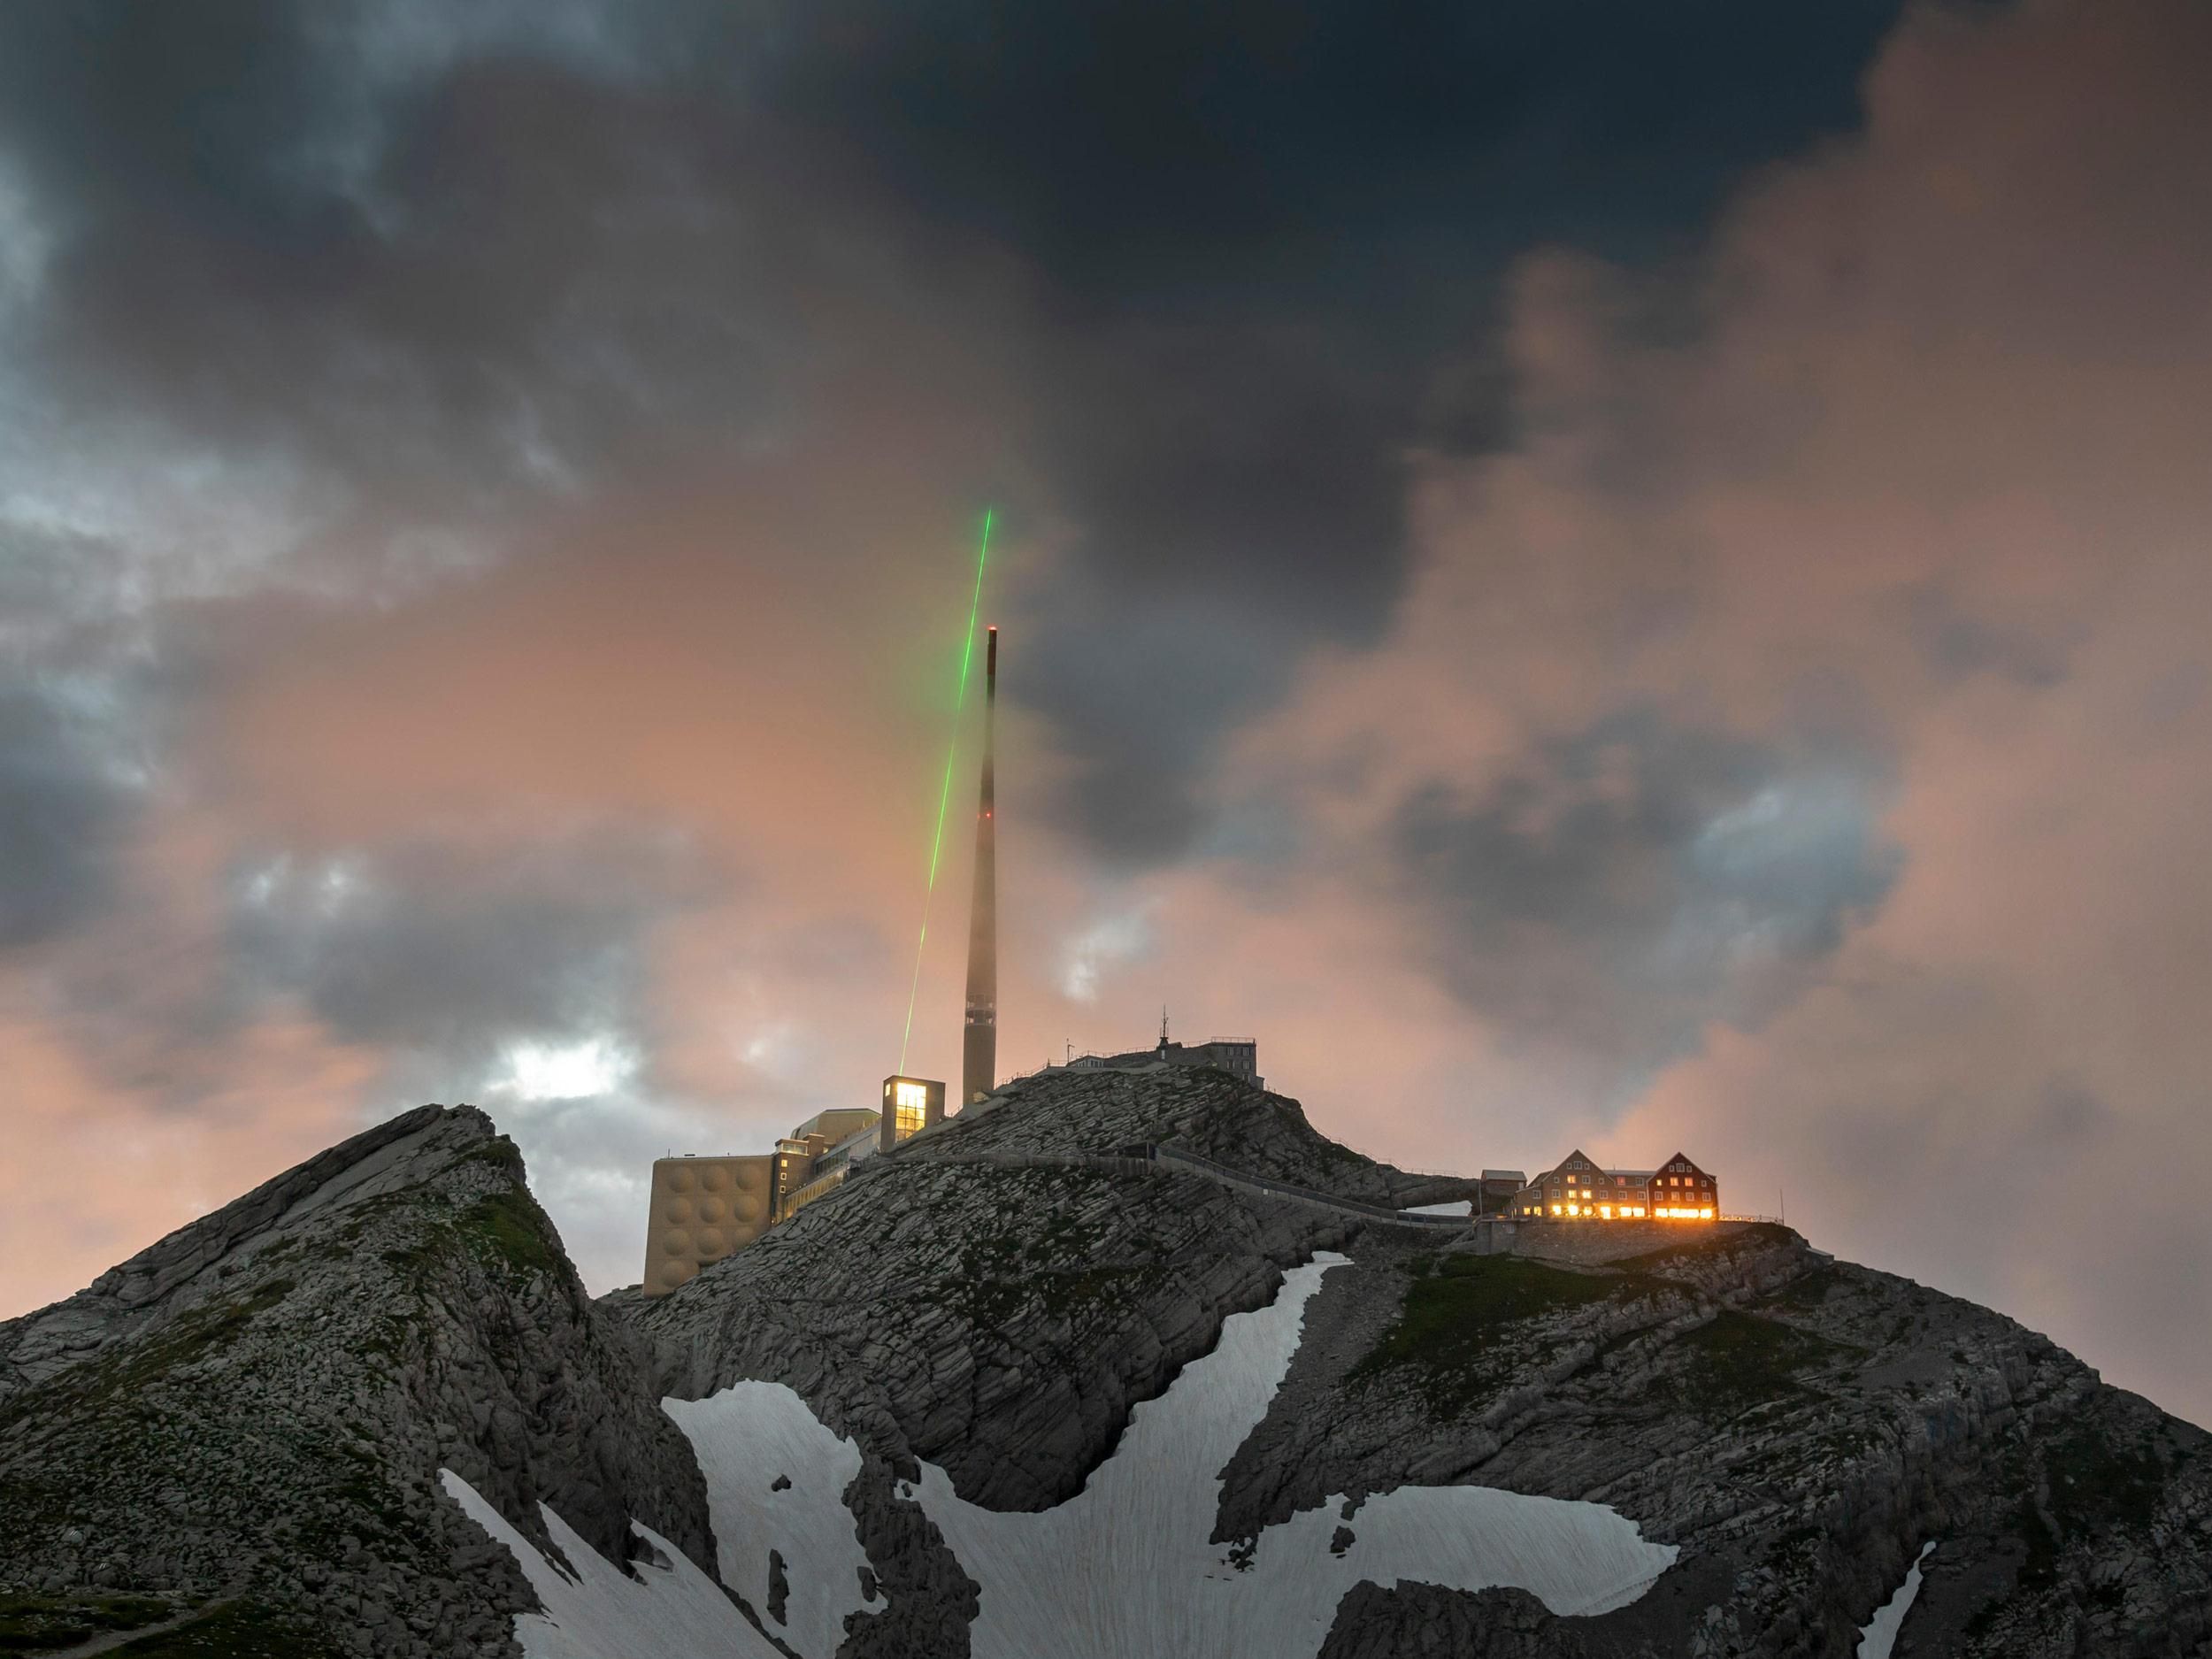 A green laser shooting up into a cloud-filled sky on the side of a cliff.